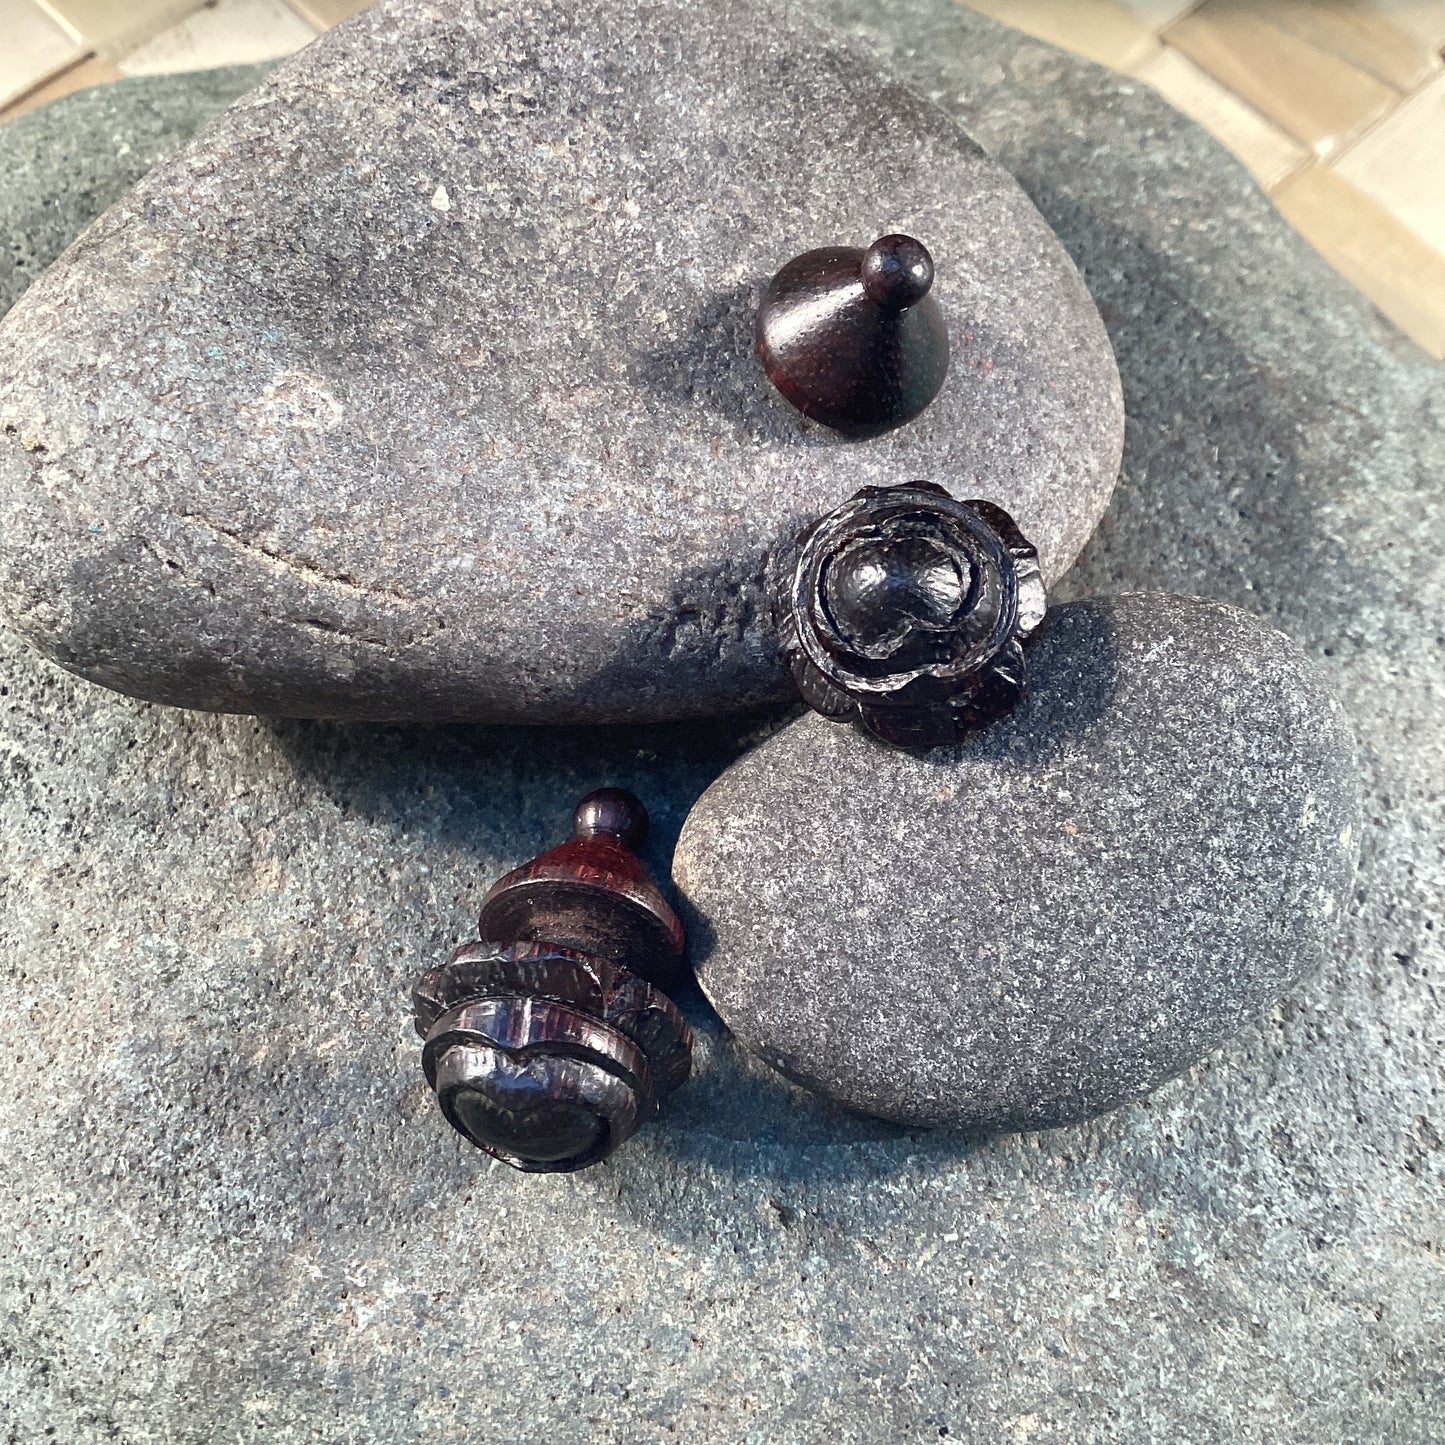 Carved studs, round post earrings. Ebony wood